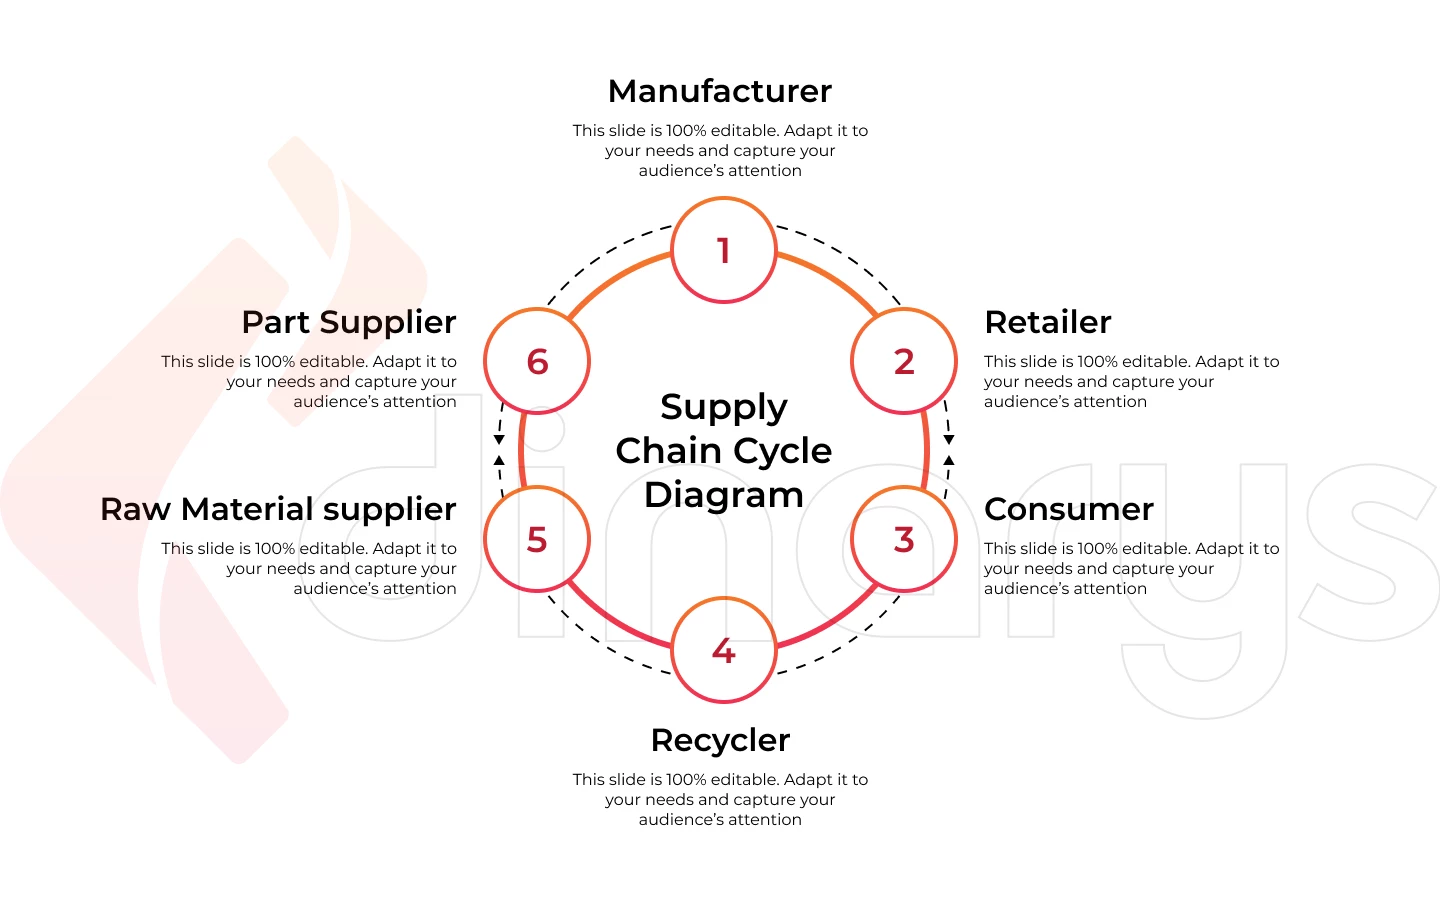 Supply Chain Cycles